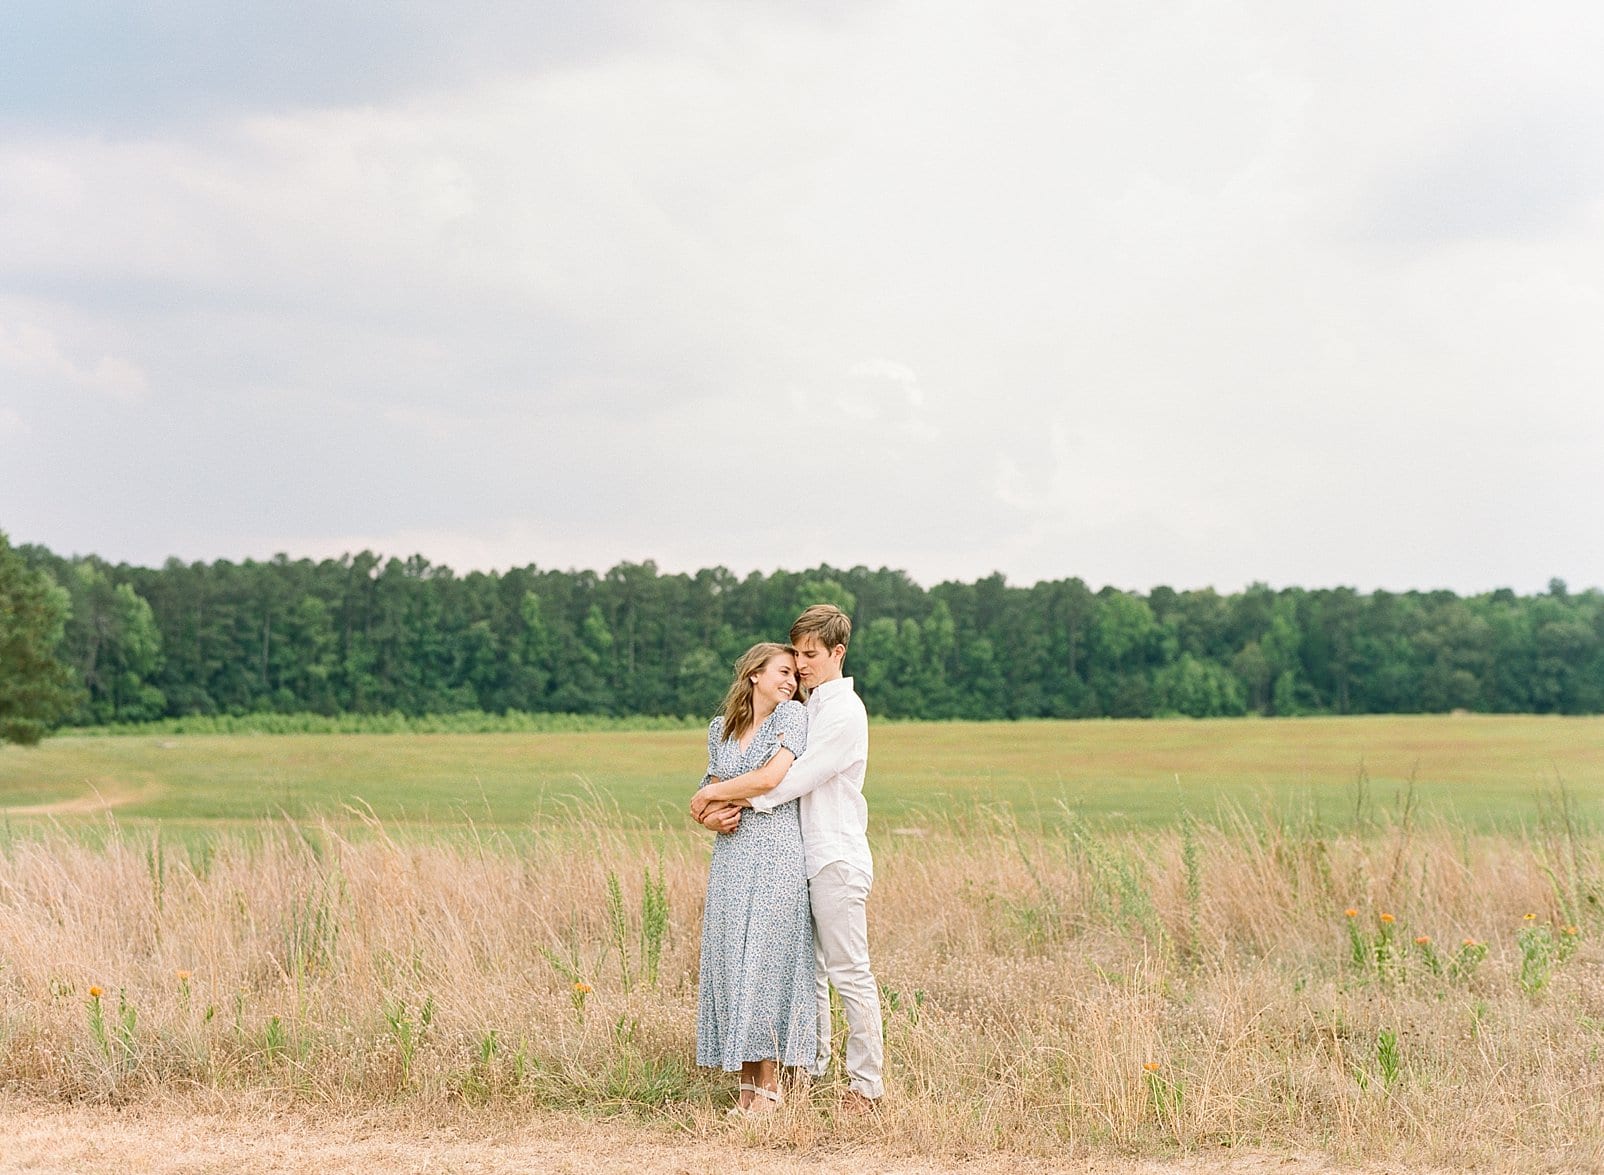 Raleigh film engagement session couple in the middle of a field with the trees in the background photo